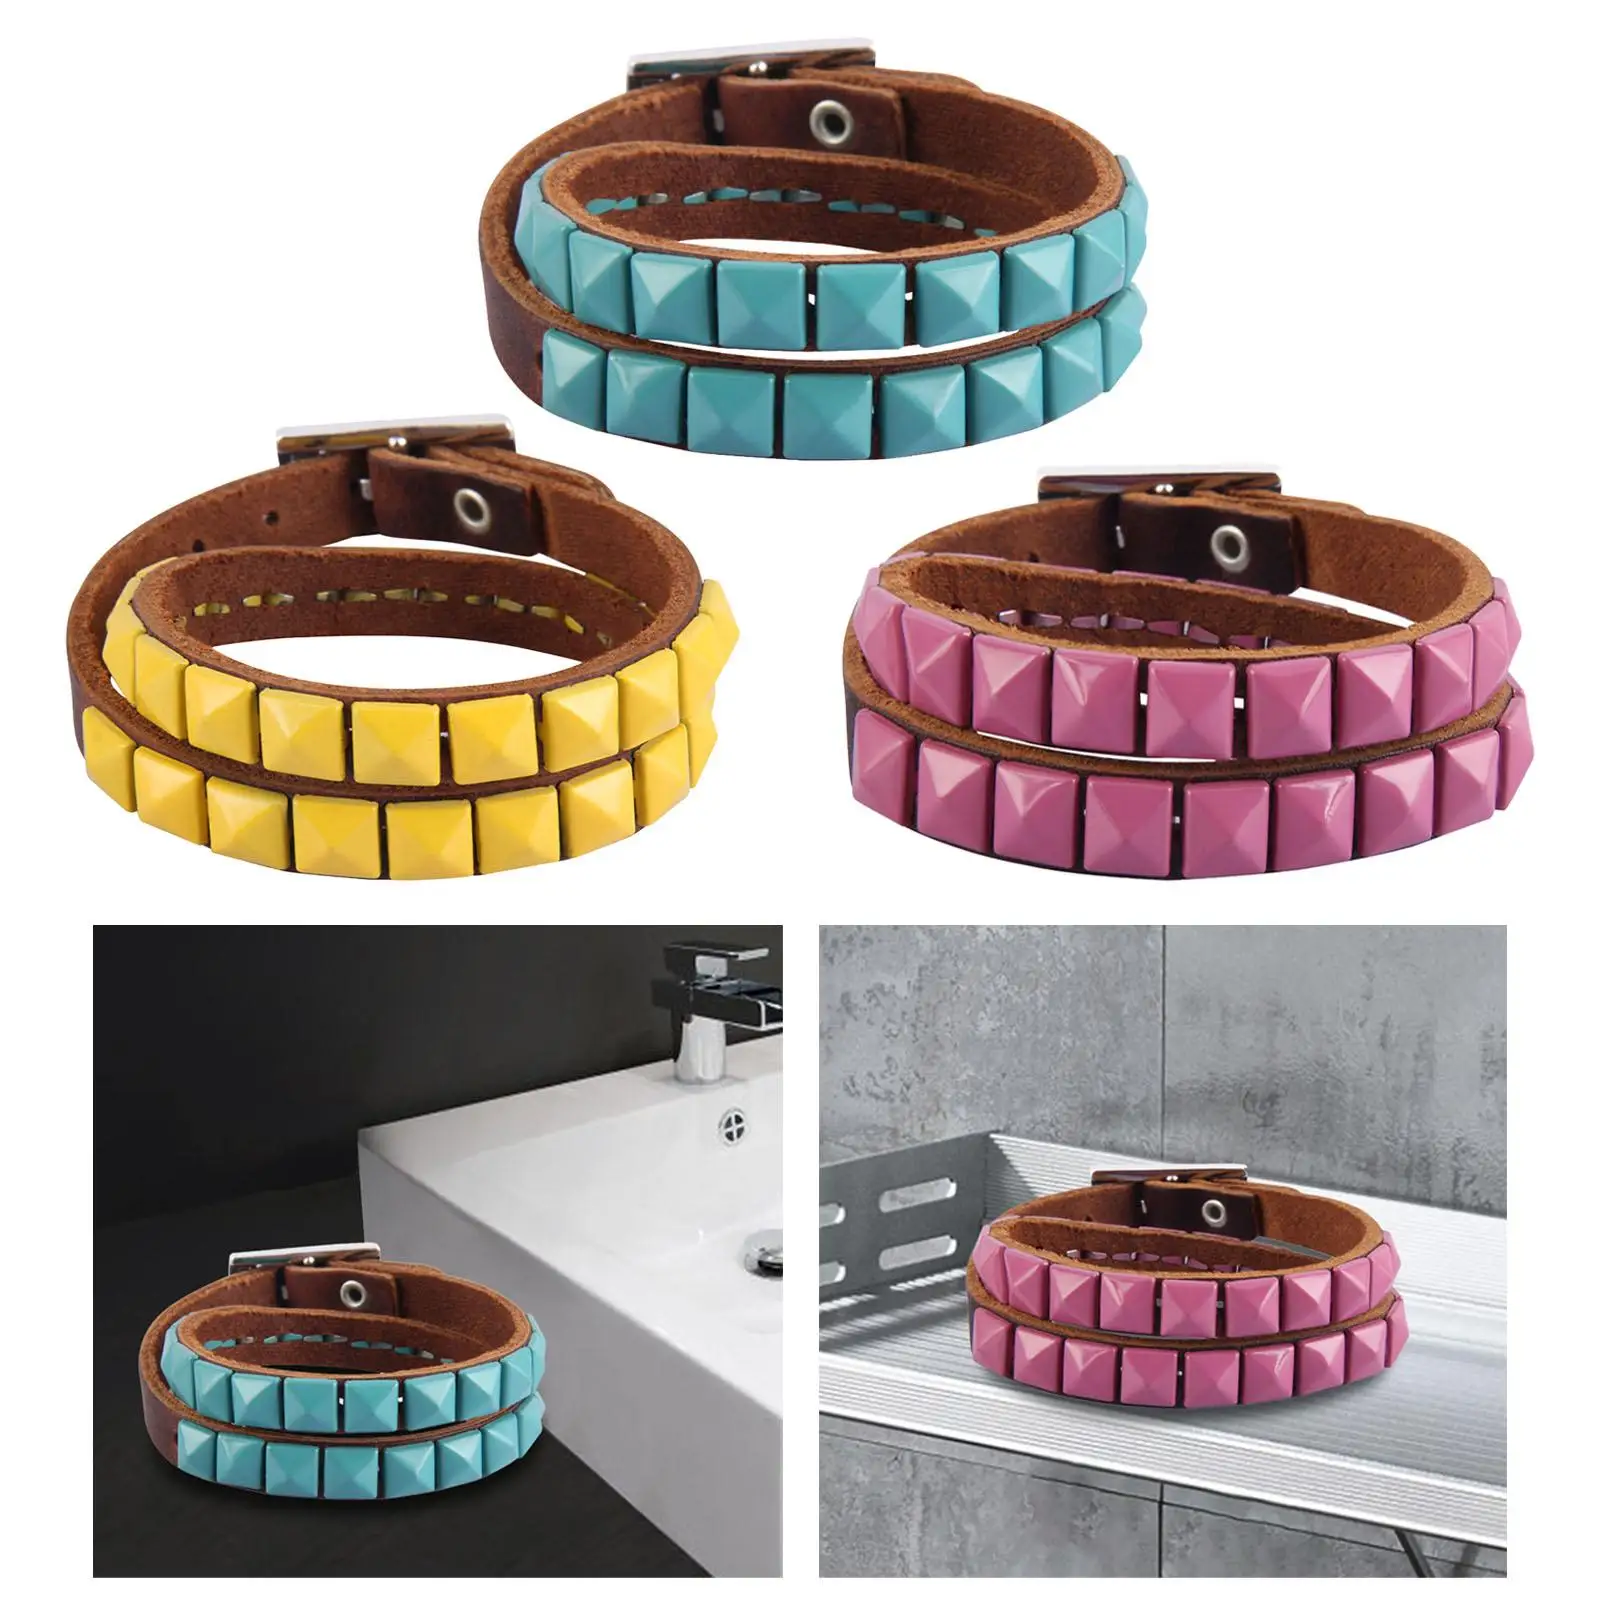 Punk Studded Bracelet Adjustable PU Leather Cuff Bangle Jewelry for Men Women Party Favors Wedding Holiday Prom Daily wearing